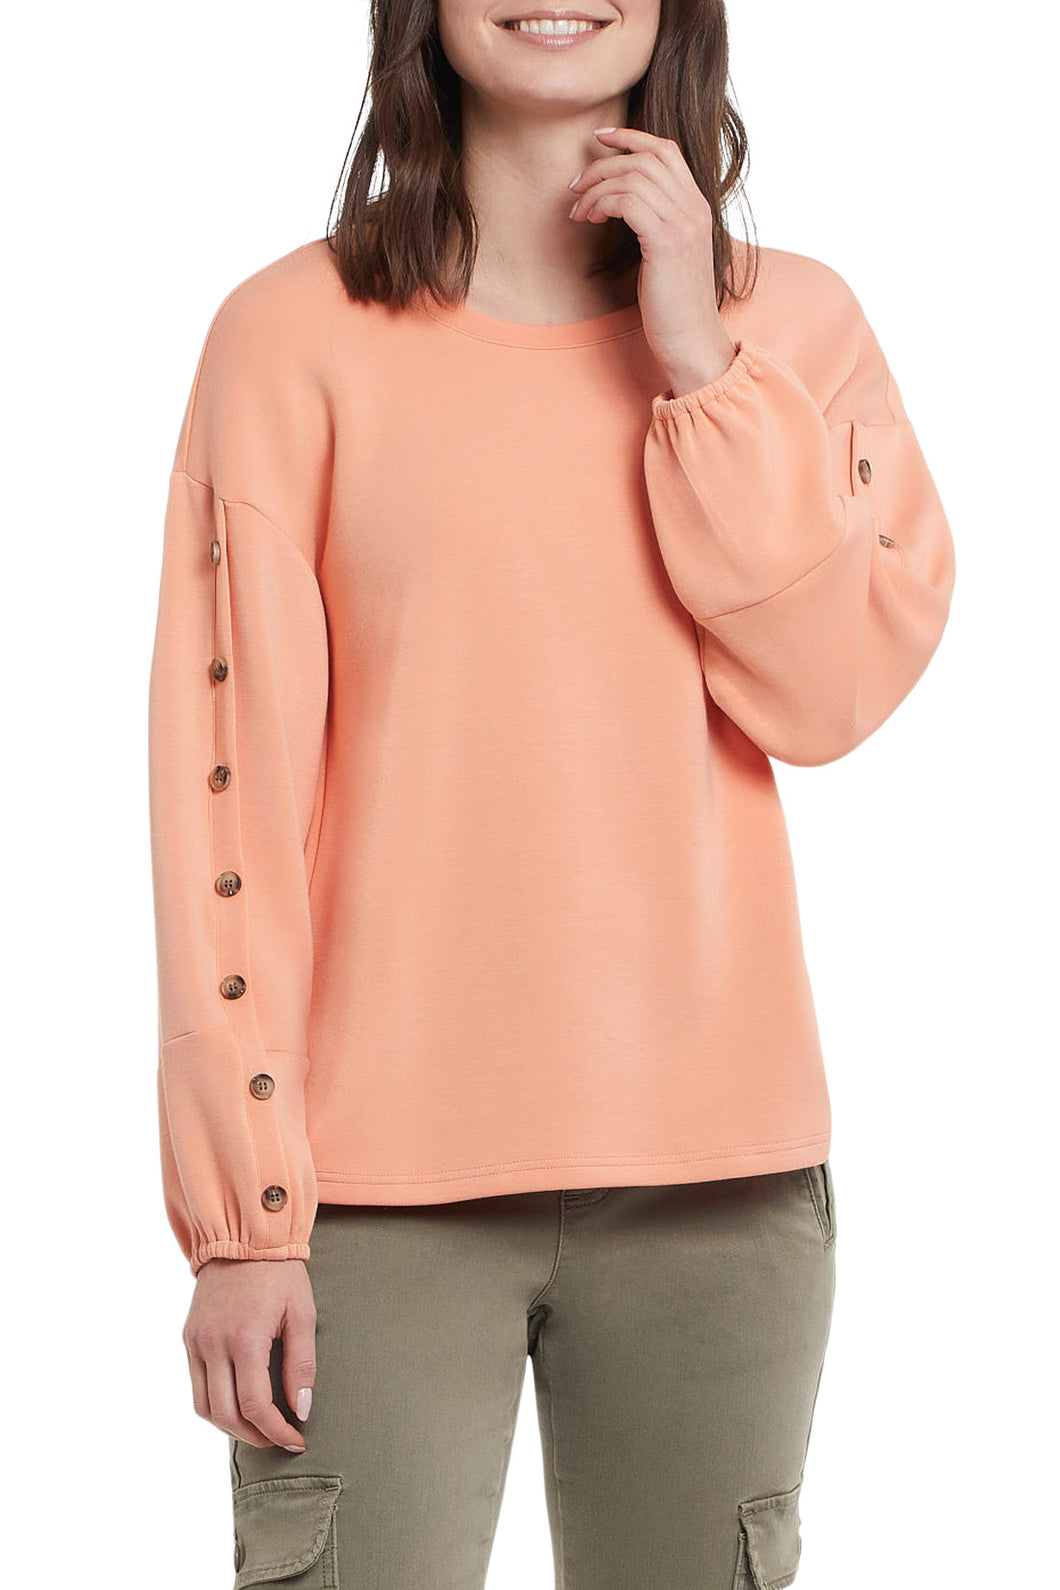 Sweatshirts with pizzazz replace plain sweatshirts of the past.  This stylish top with scuba knit fabric and just the right amount of embellishments, elevate any outfit. The gorgeous, warm Sunkissed color will take you back to those warm summer days when the weather is chilly.